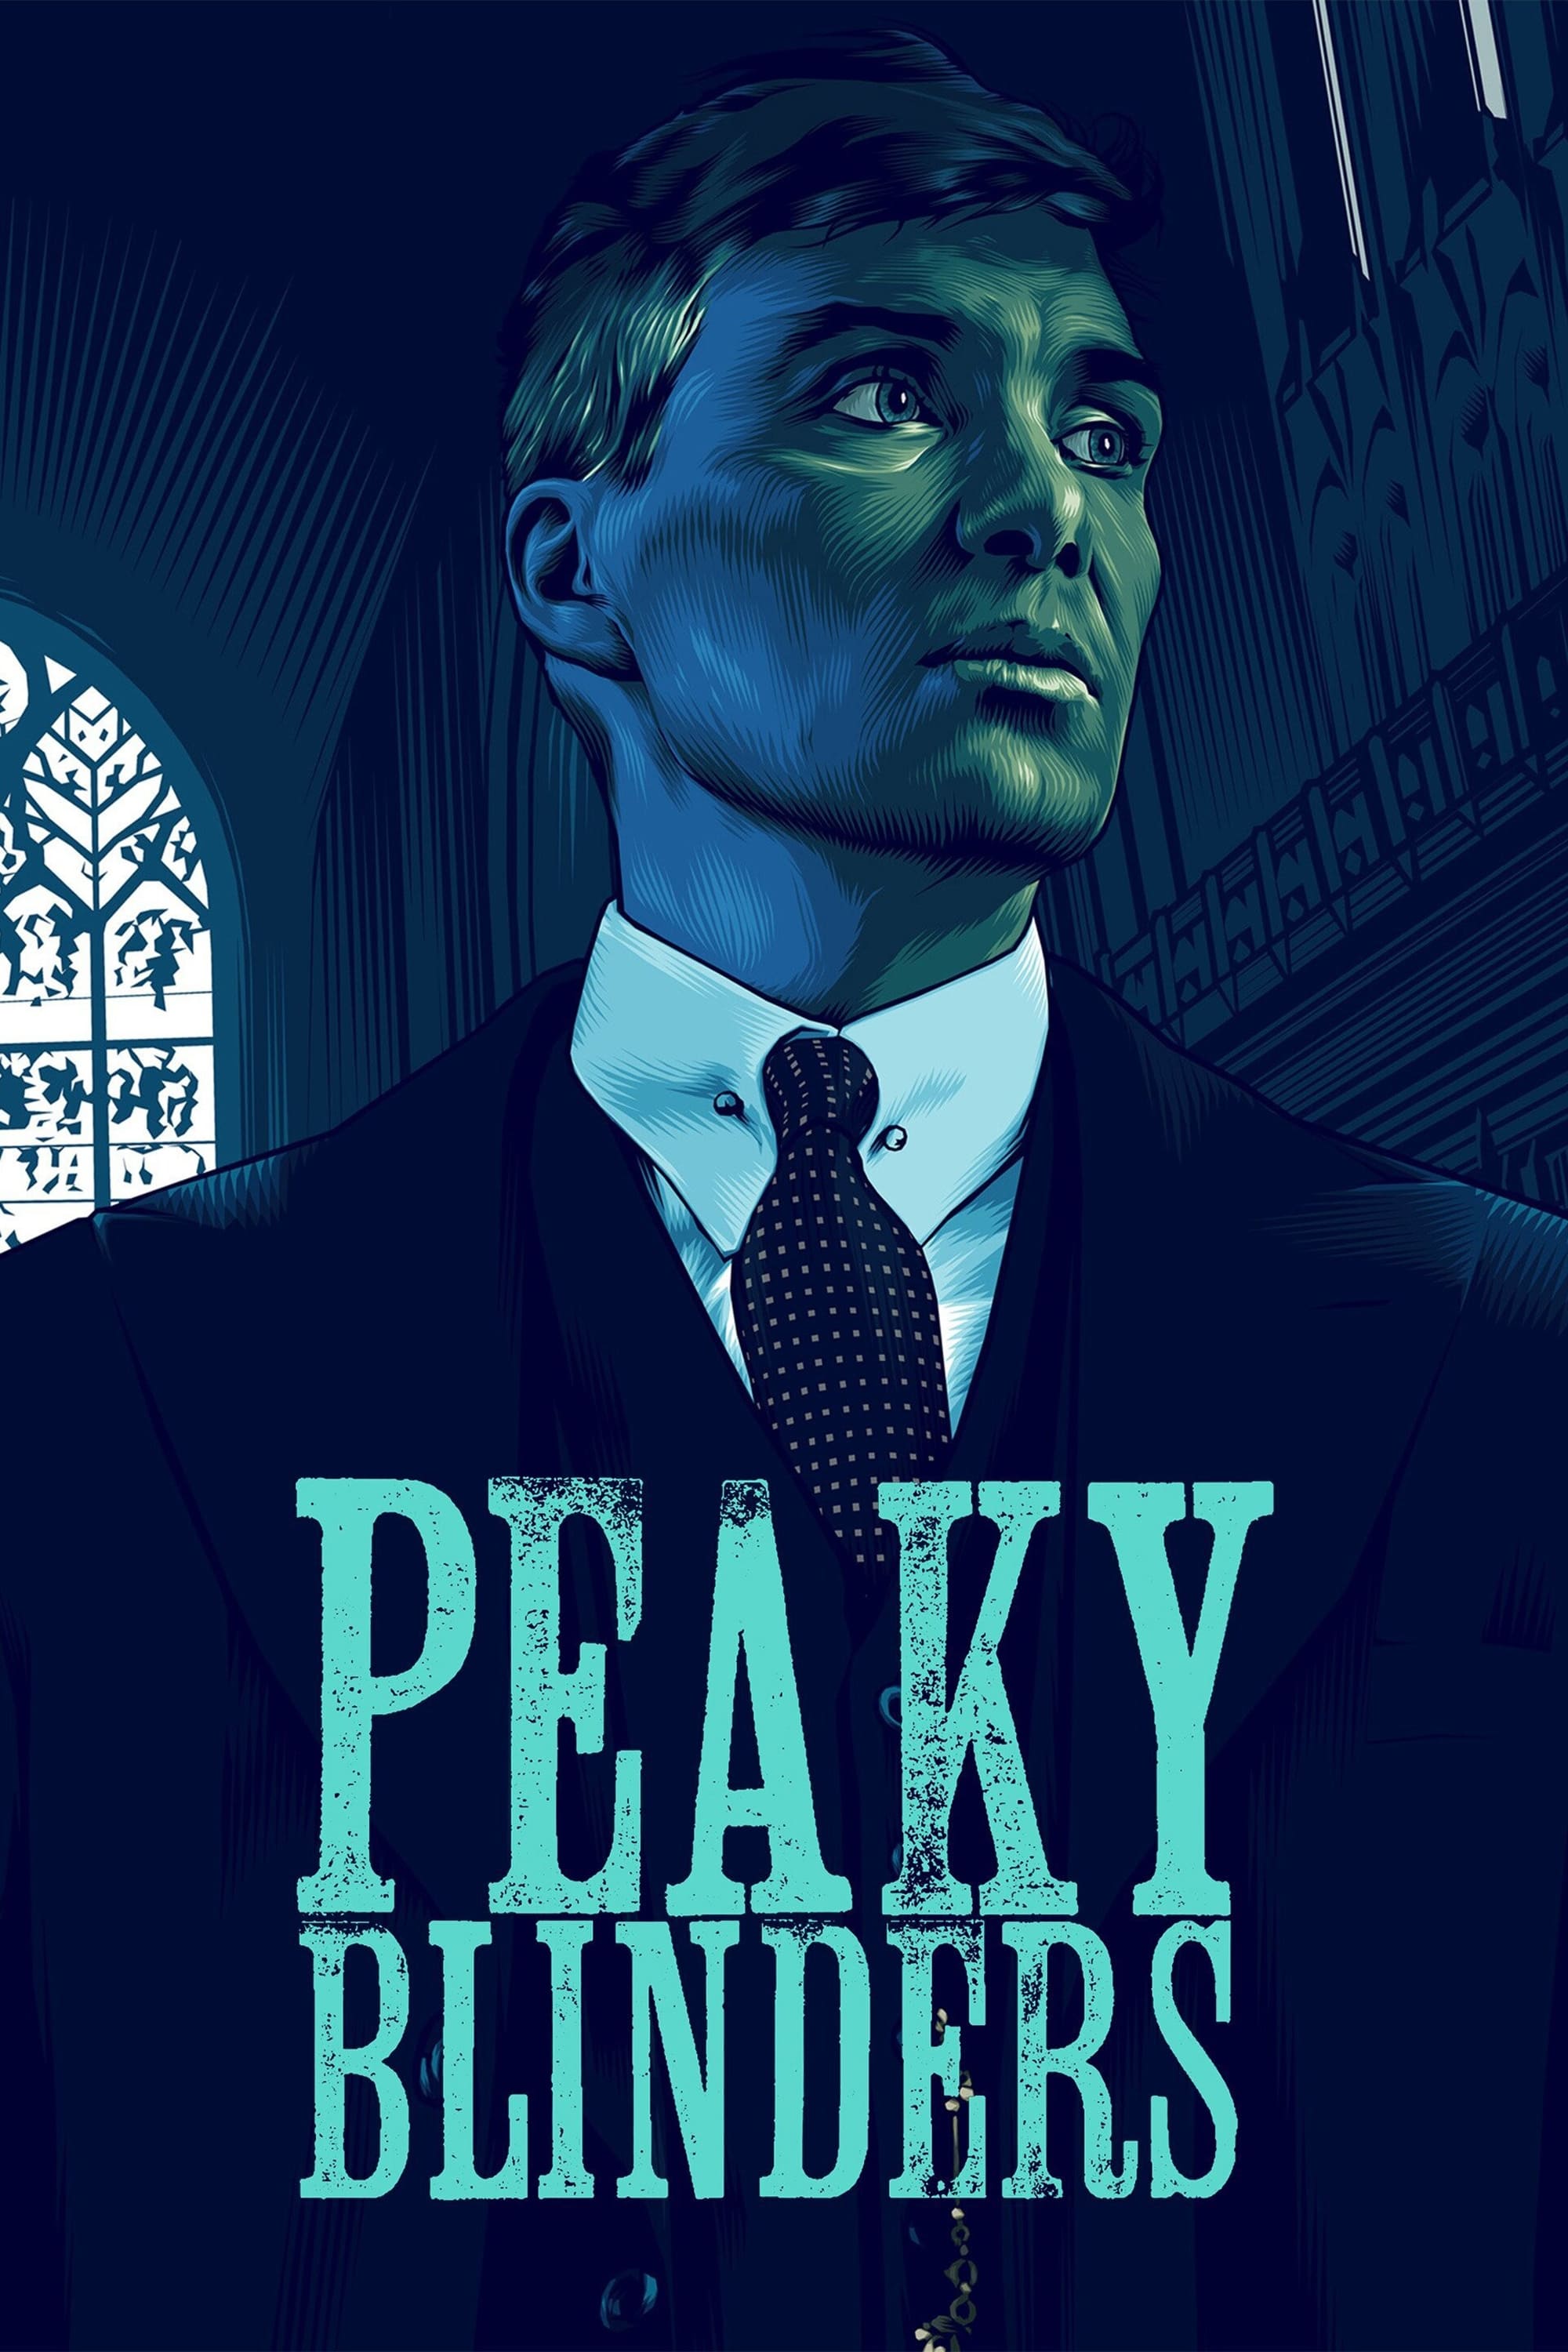 Peaky Blinders TV Shows About Ireland